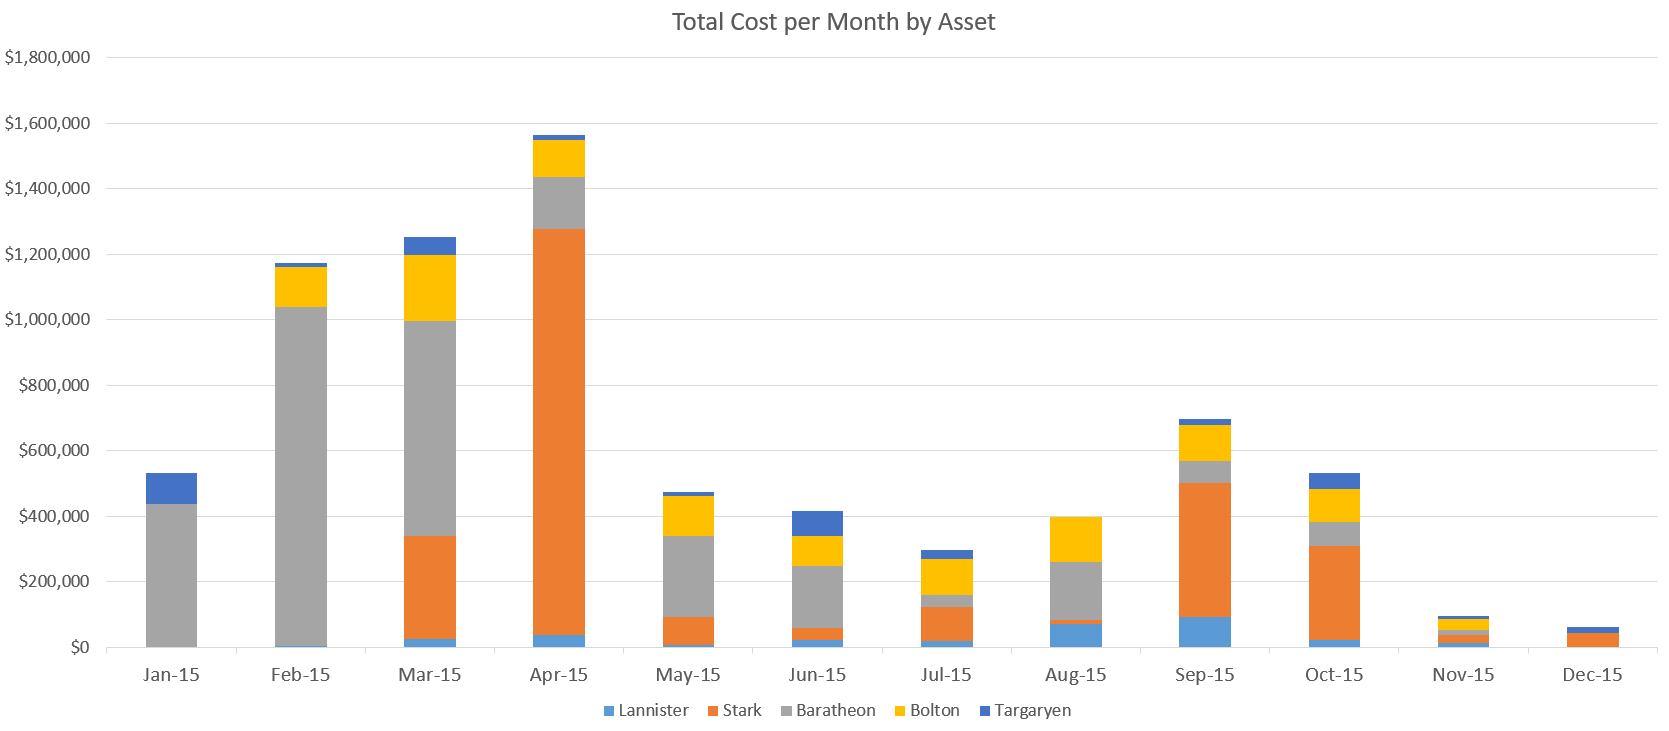 Total cost per month by asset